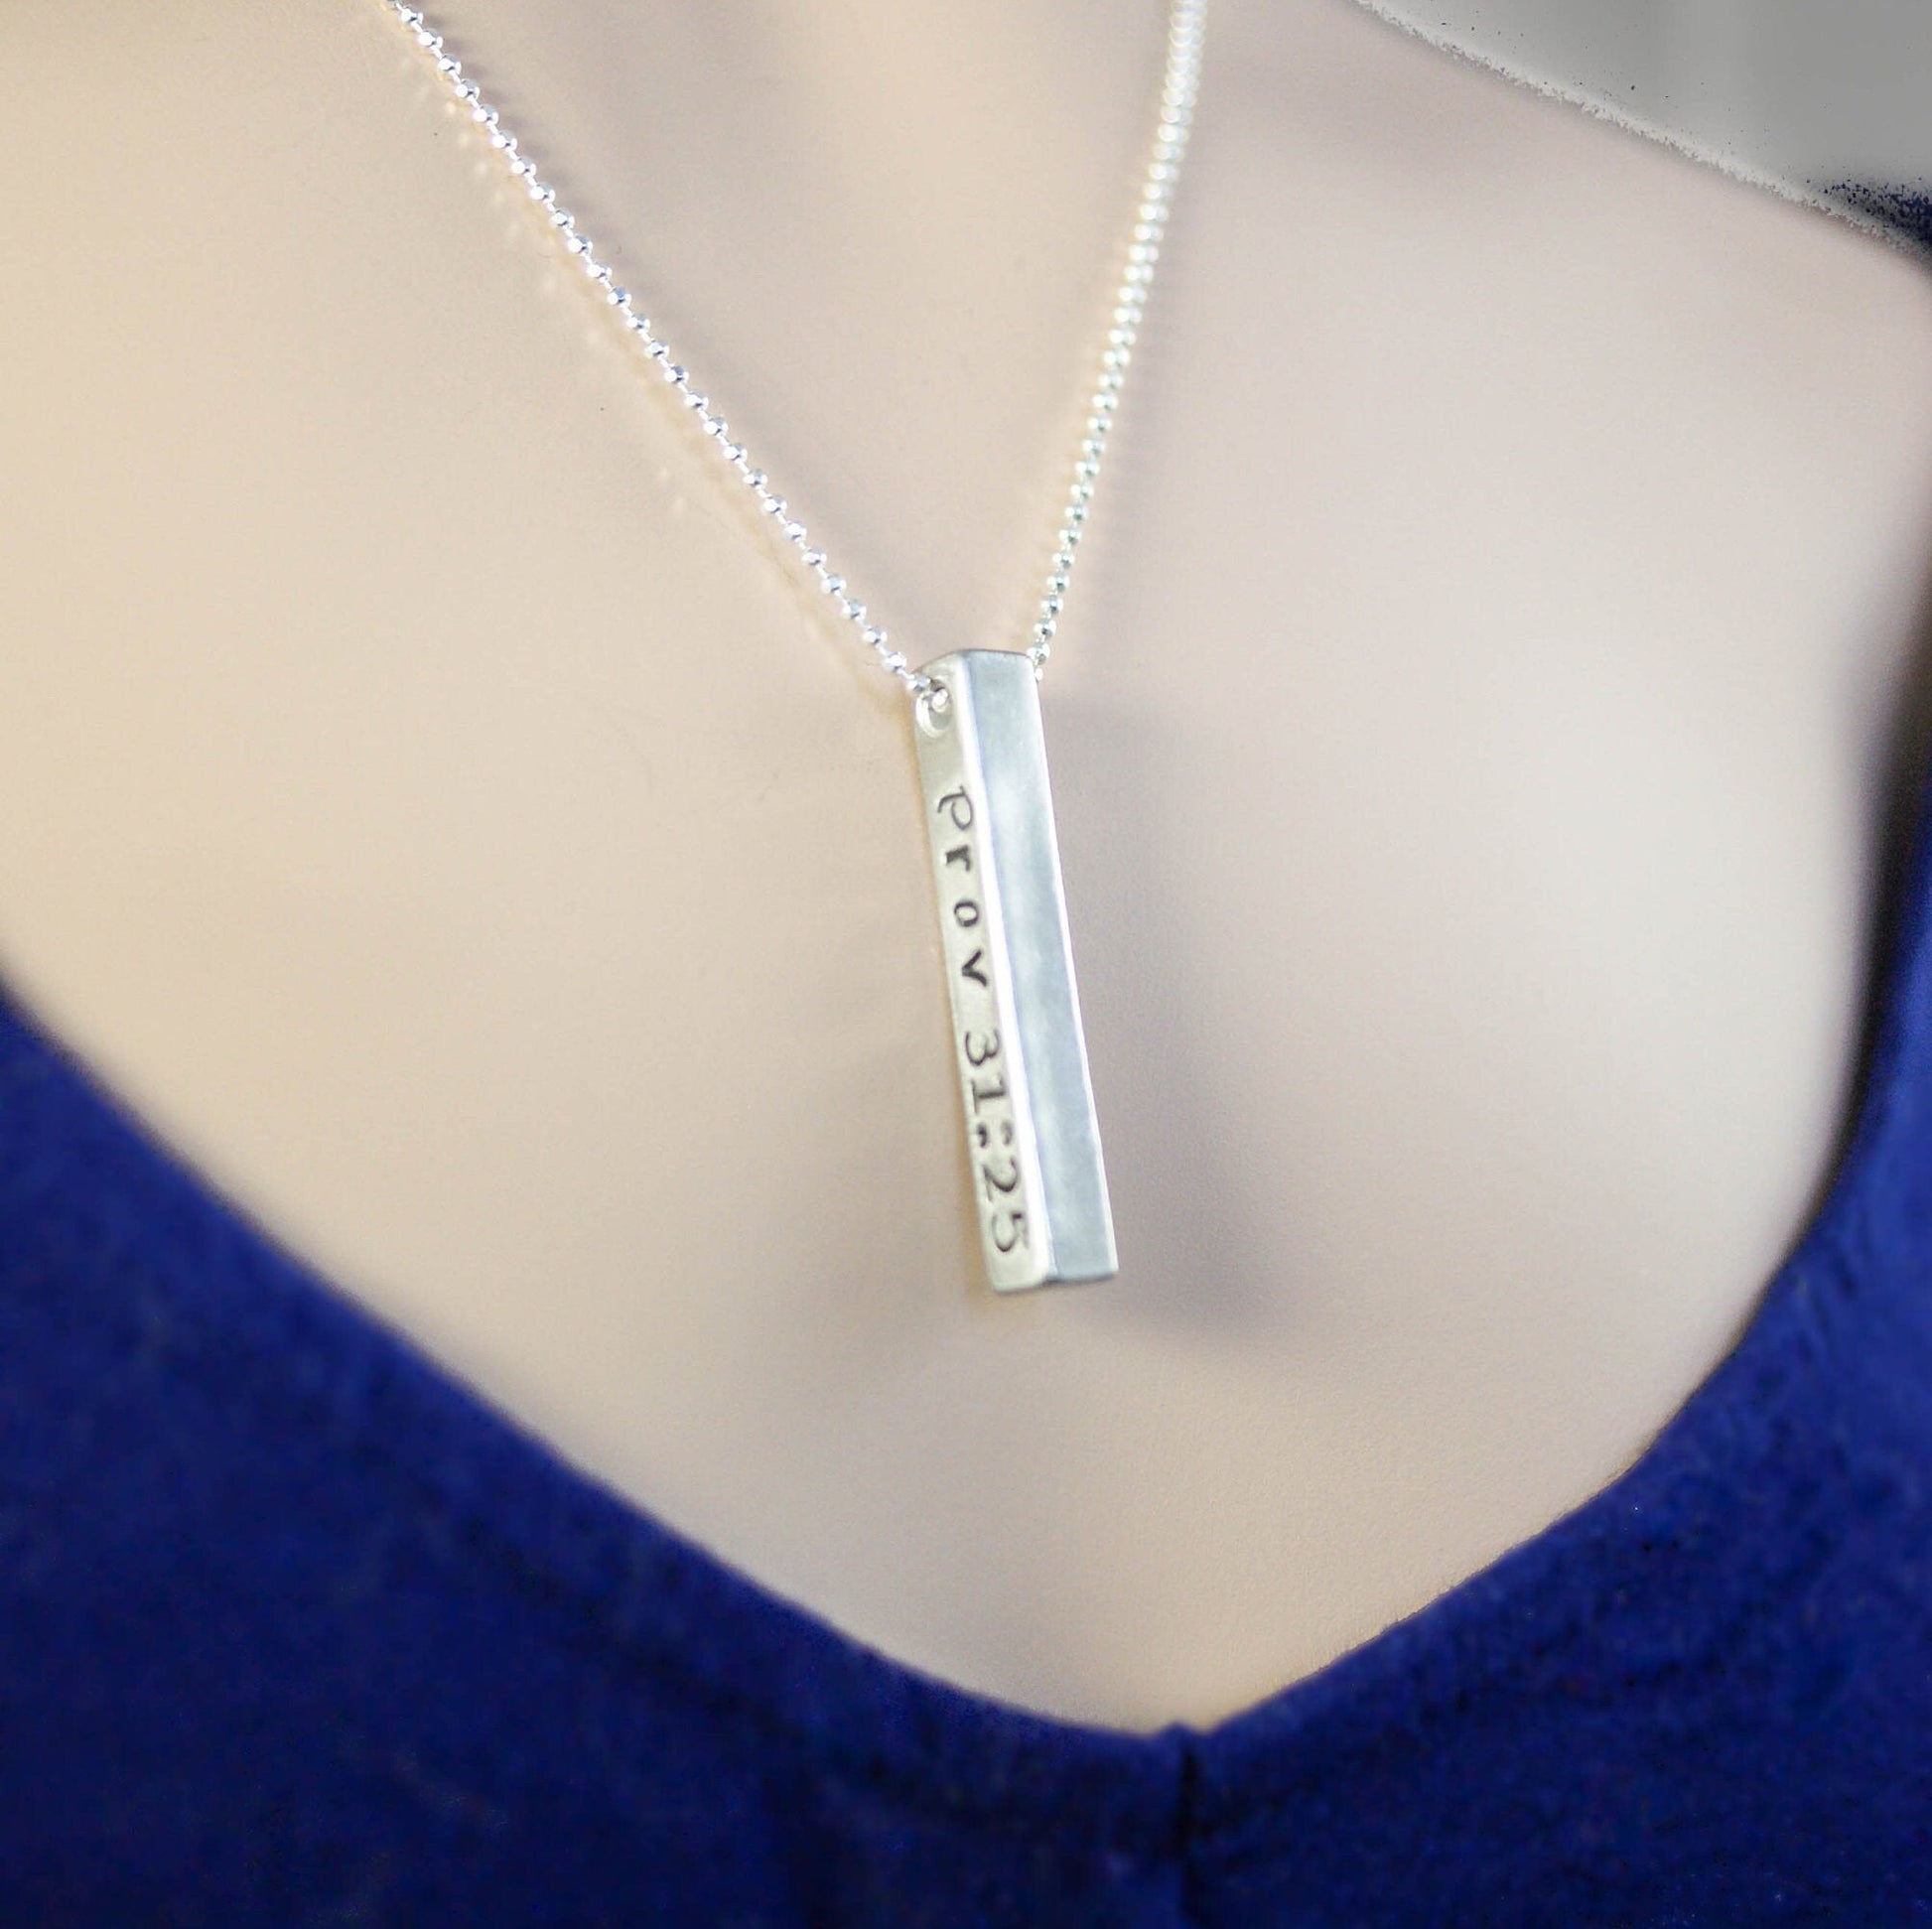 Long silver bar necklace in Artisan Pewter handstamped with Prov 31:25 on neck